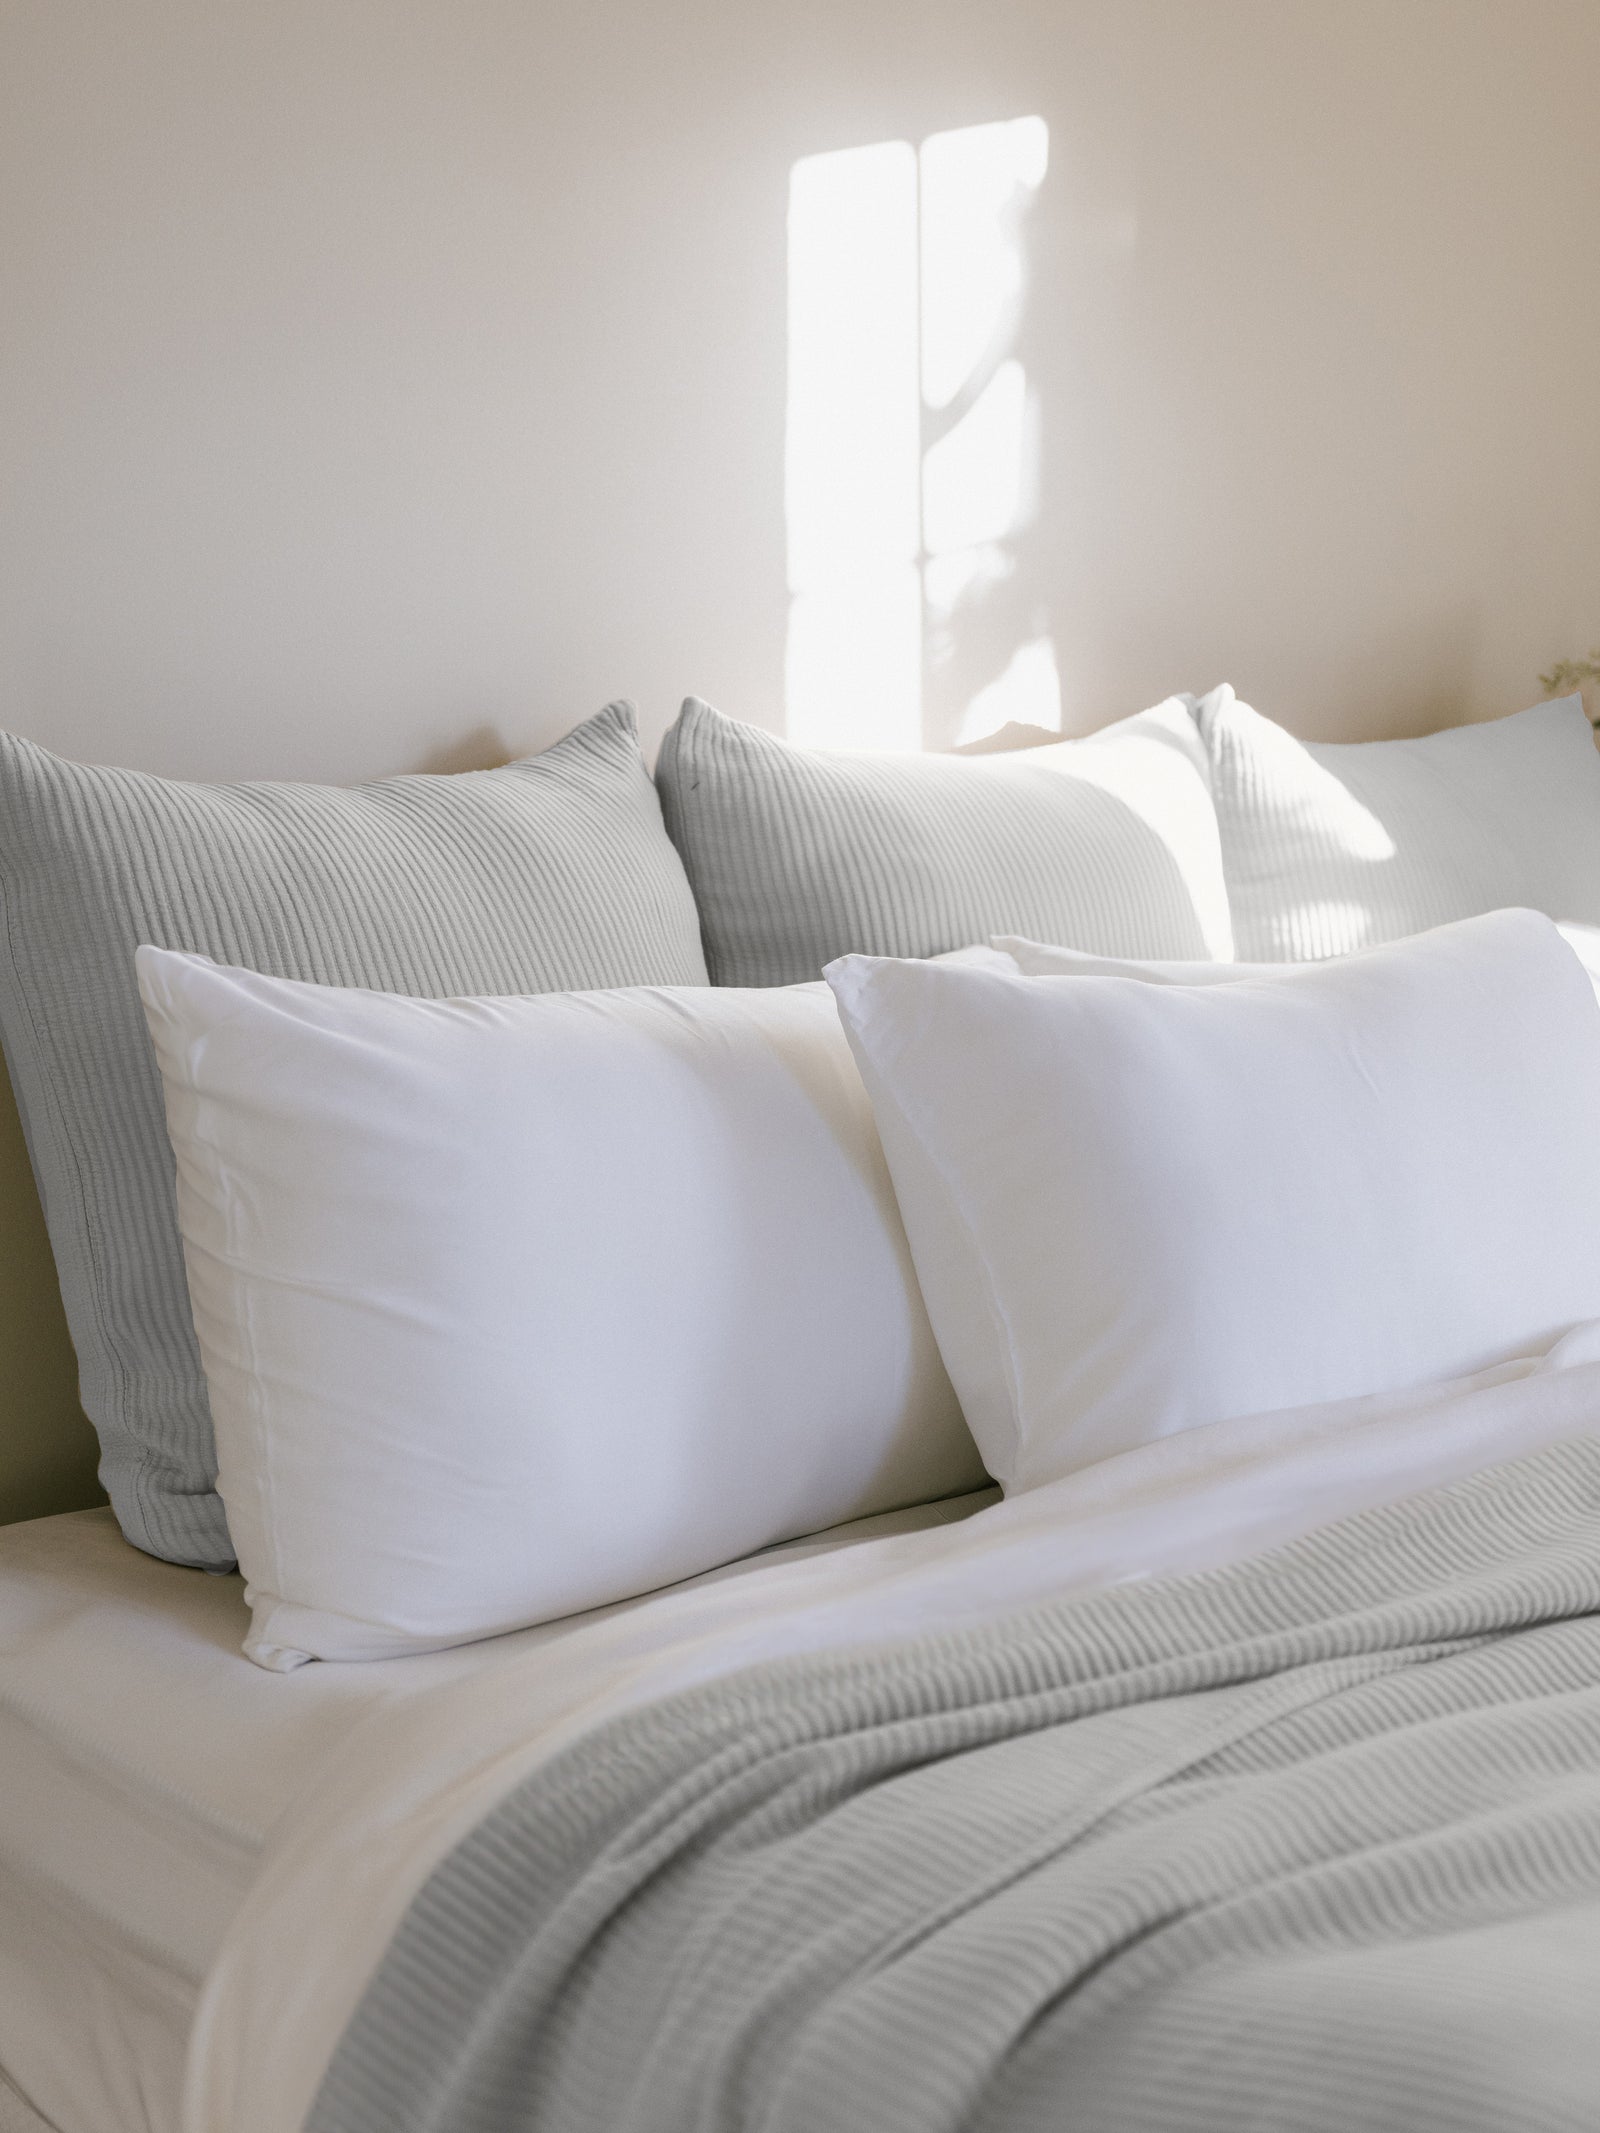 Light Grey euro coverlet shams behind white pillows on bed 